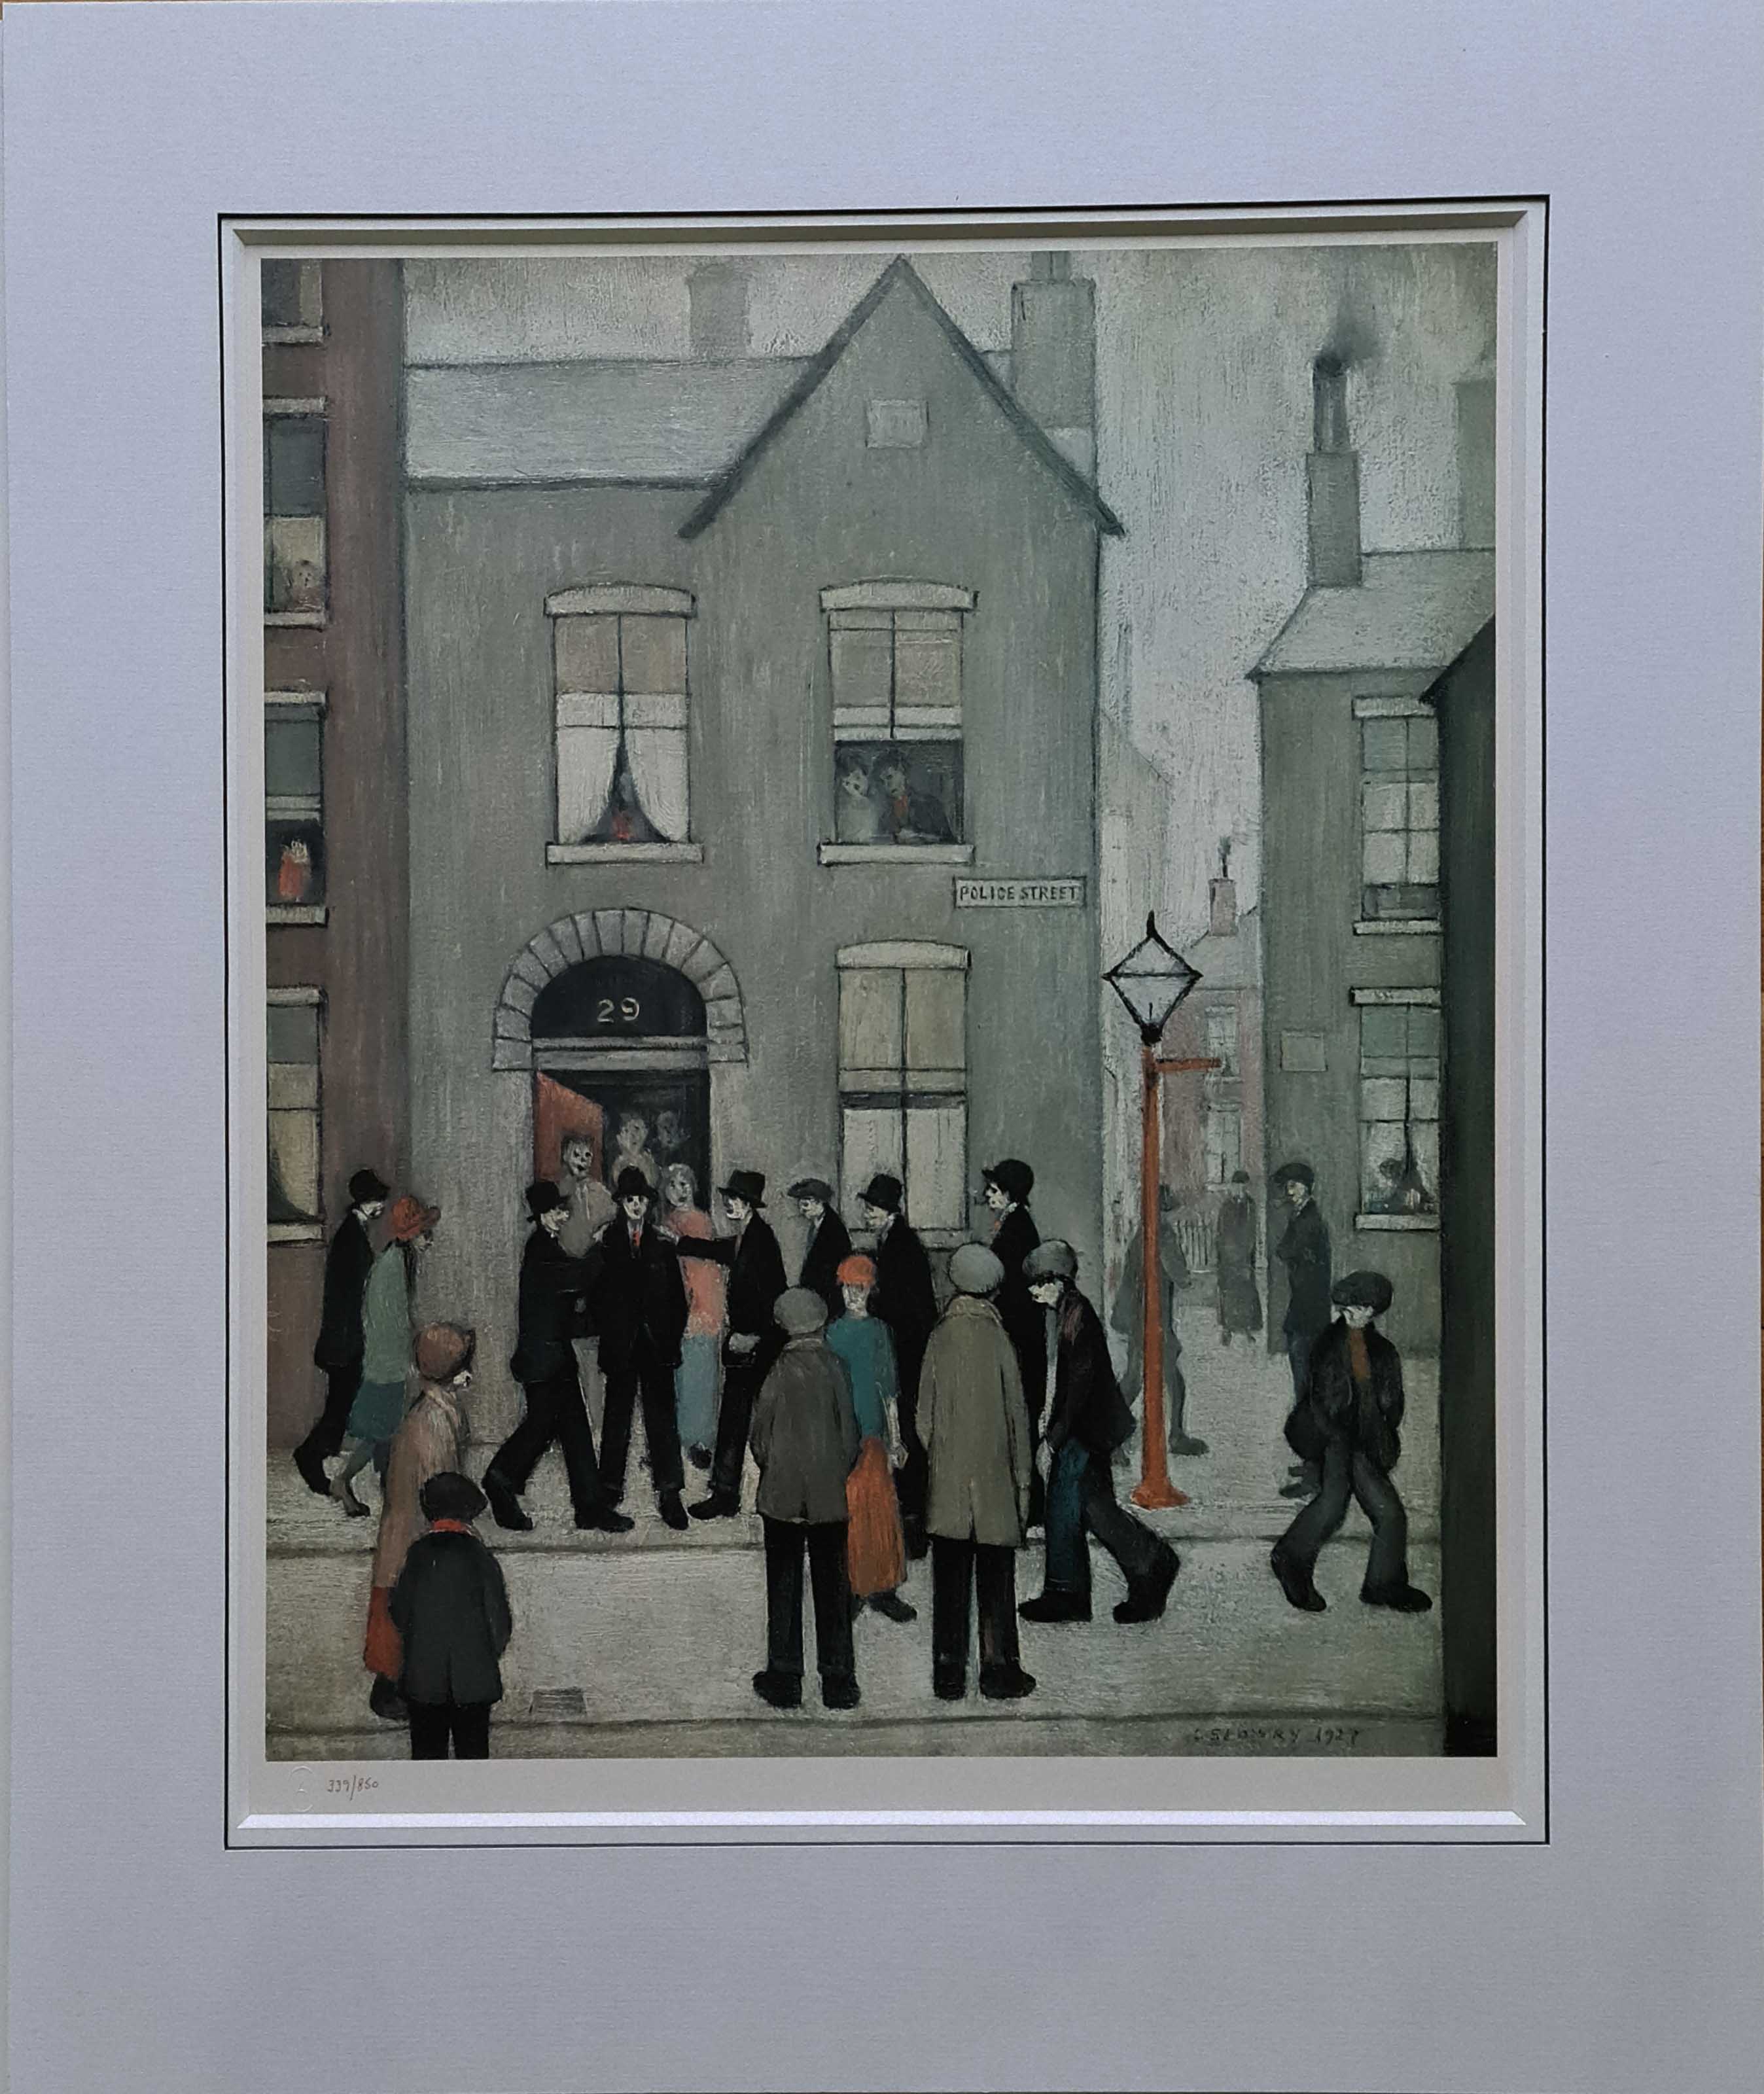 lowry, arrest, limited edition print